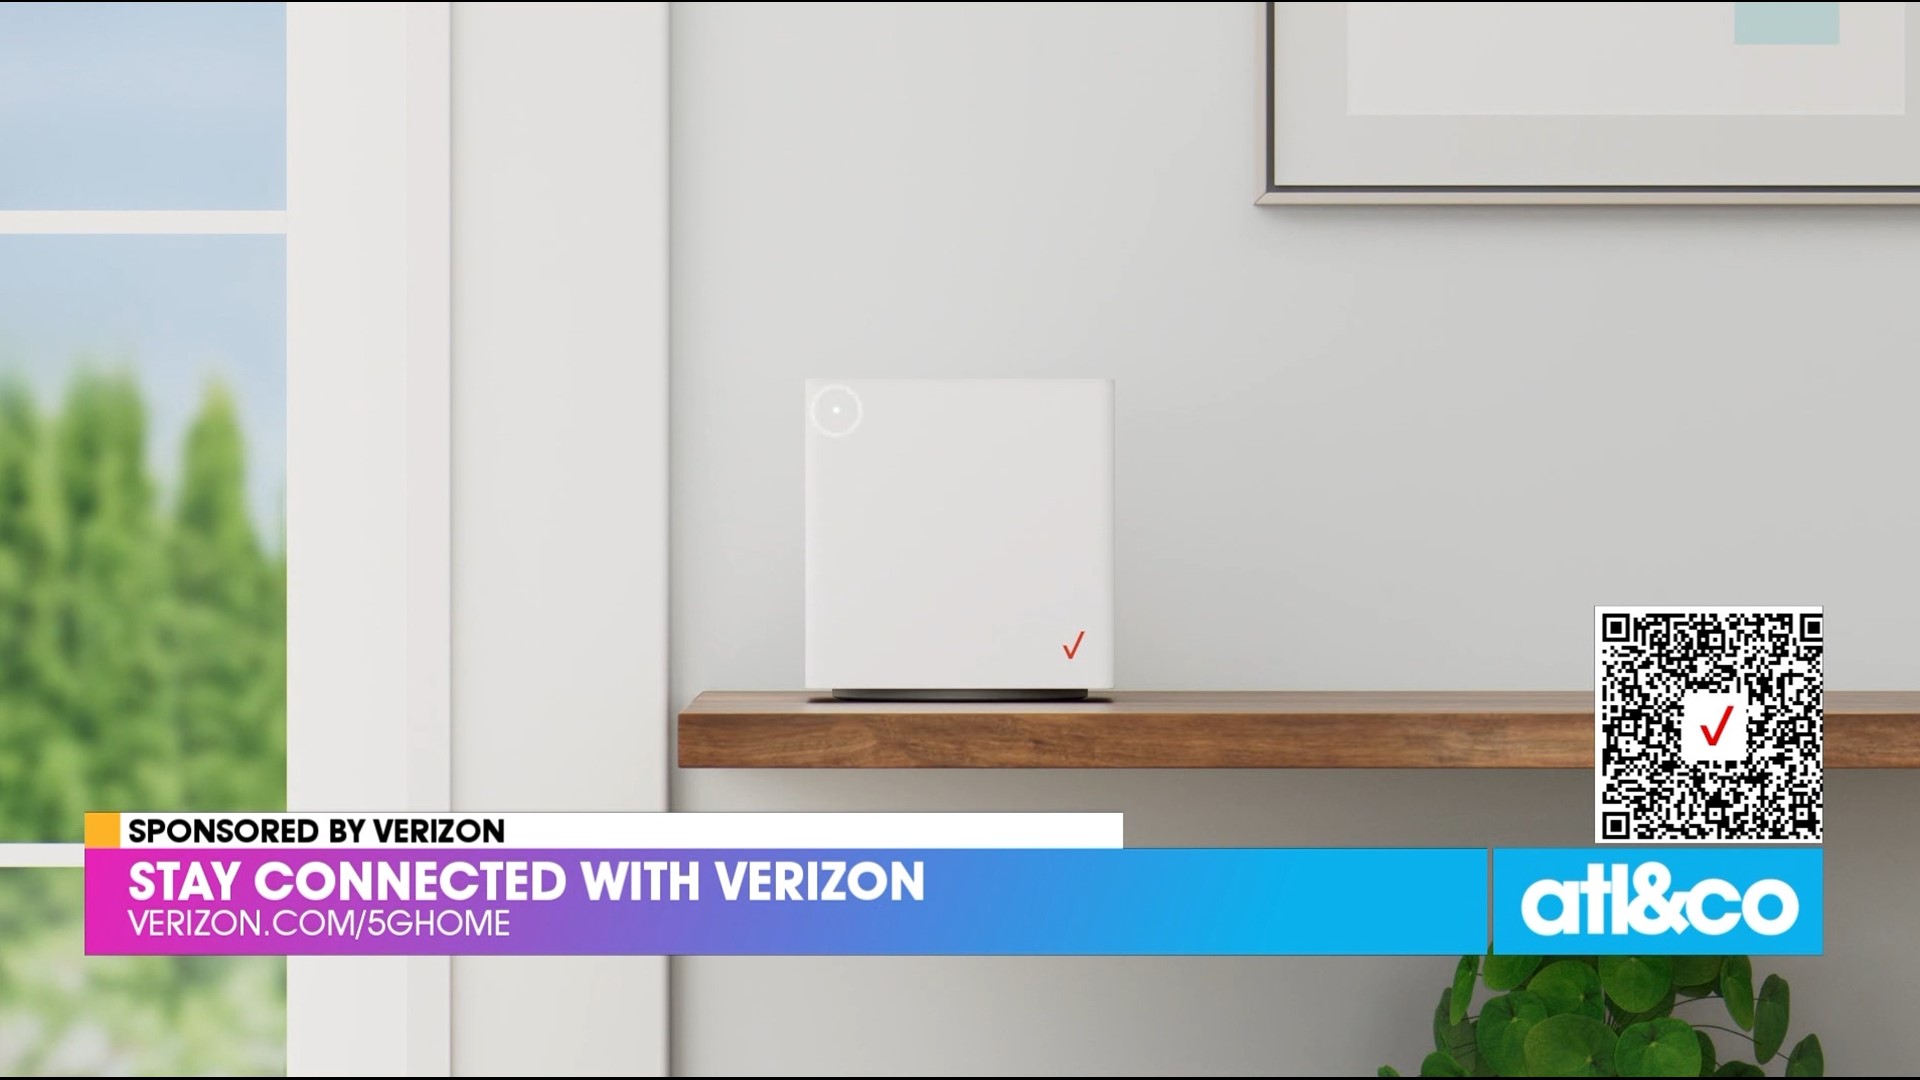 Celebrate National Neighbor Month with Verizon. Find out how they make it easier than ever to stay connected at Verizon.com/5GHome | Paid Content